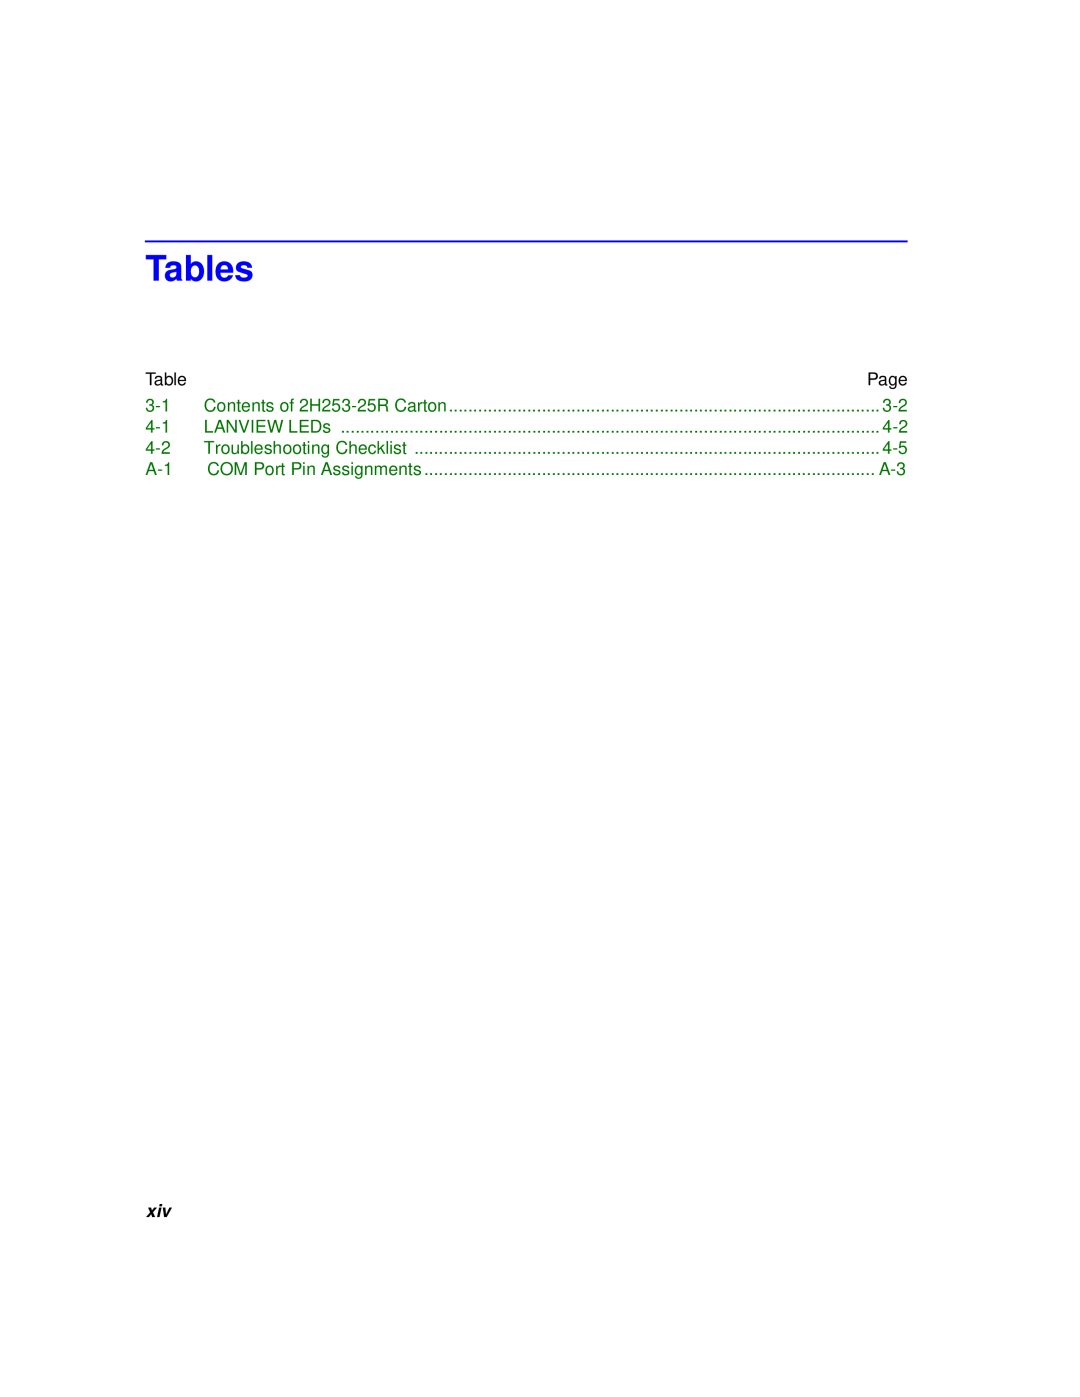 Cabletron Systems 2H253-25R manual Tables, LANVIEW LEDs, Troubleshooting Checklist, COM Port Pin Assignments 